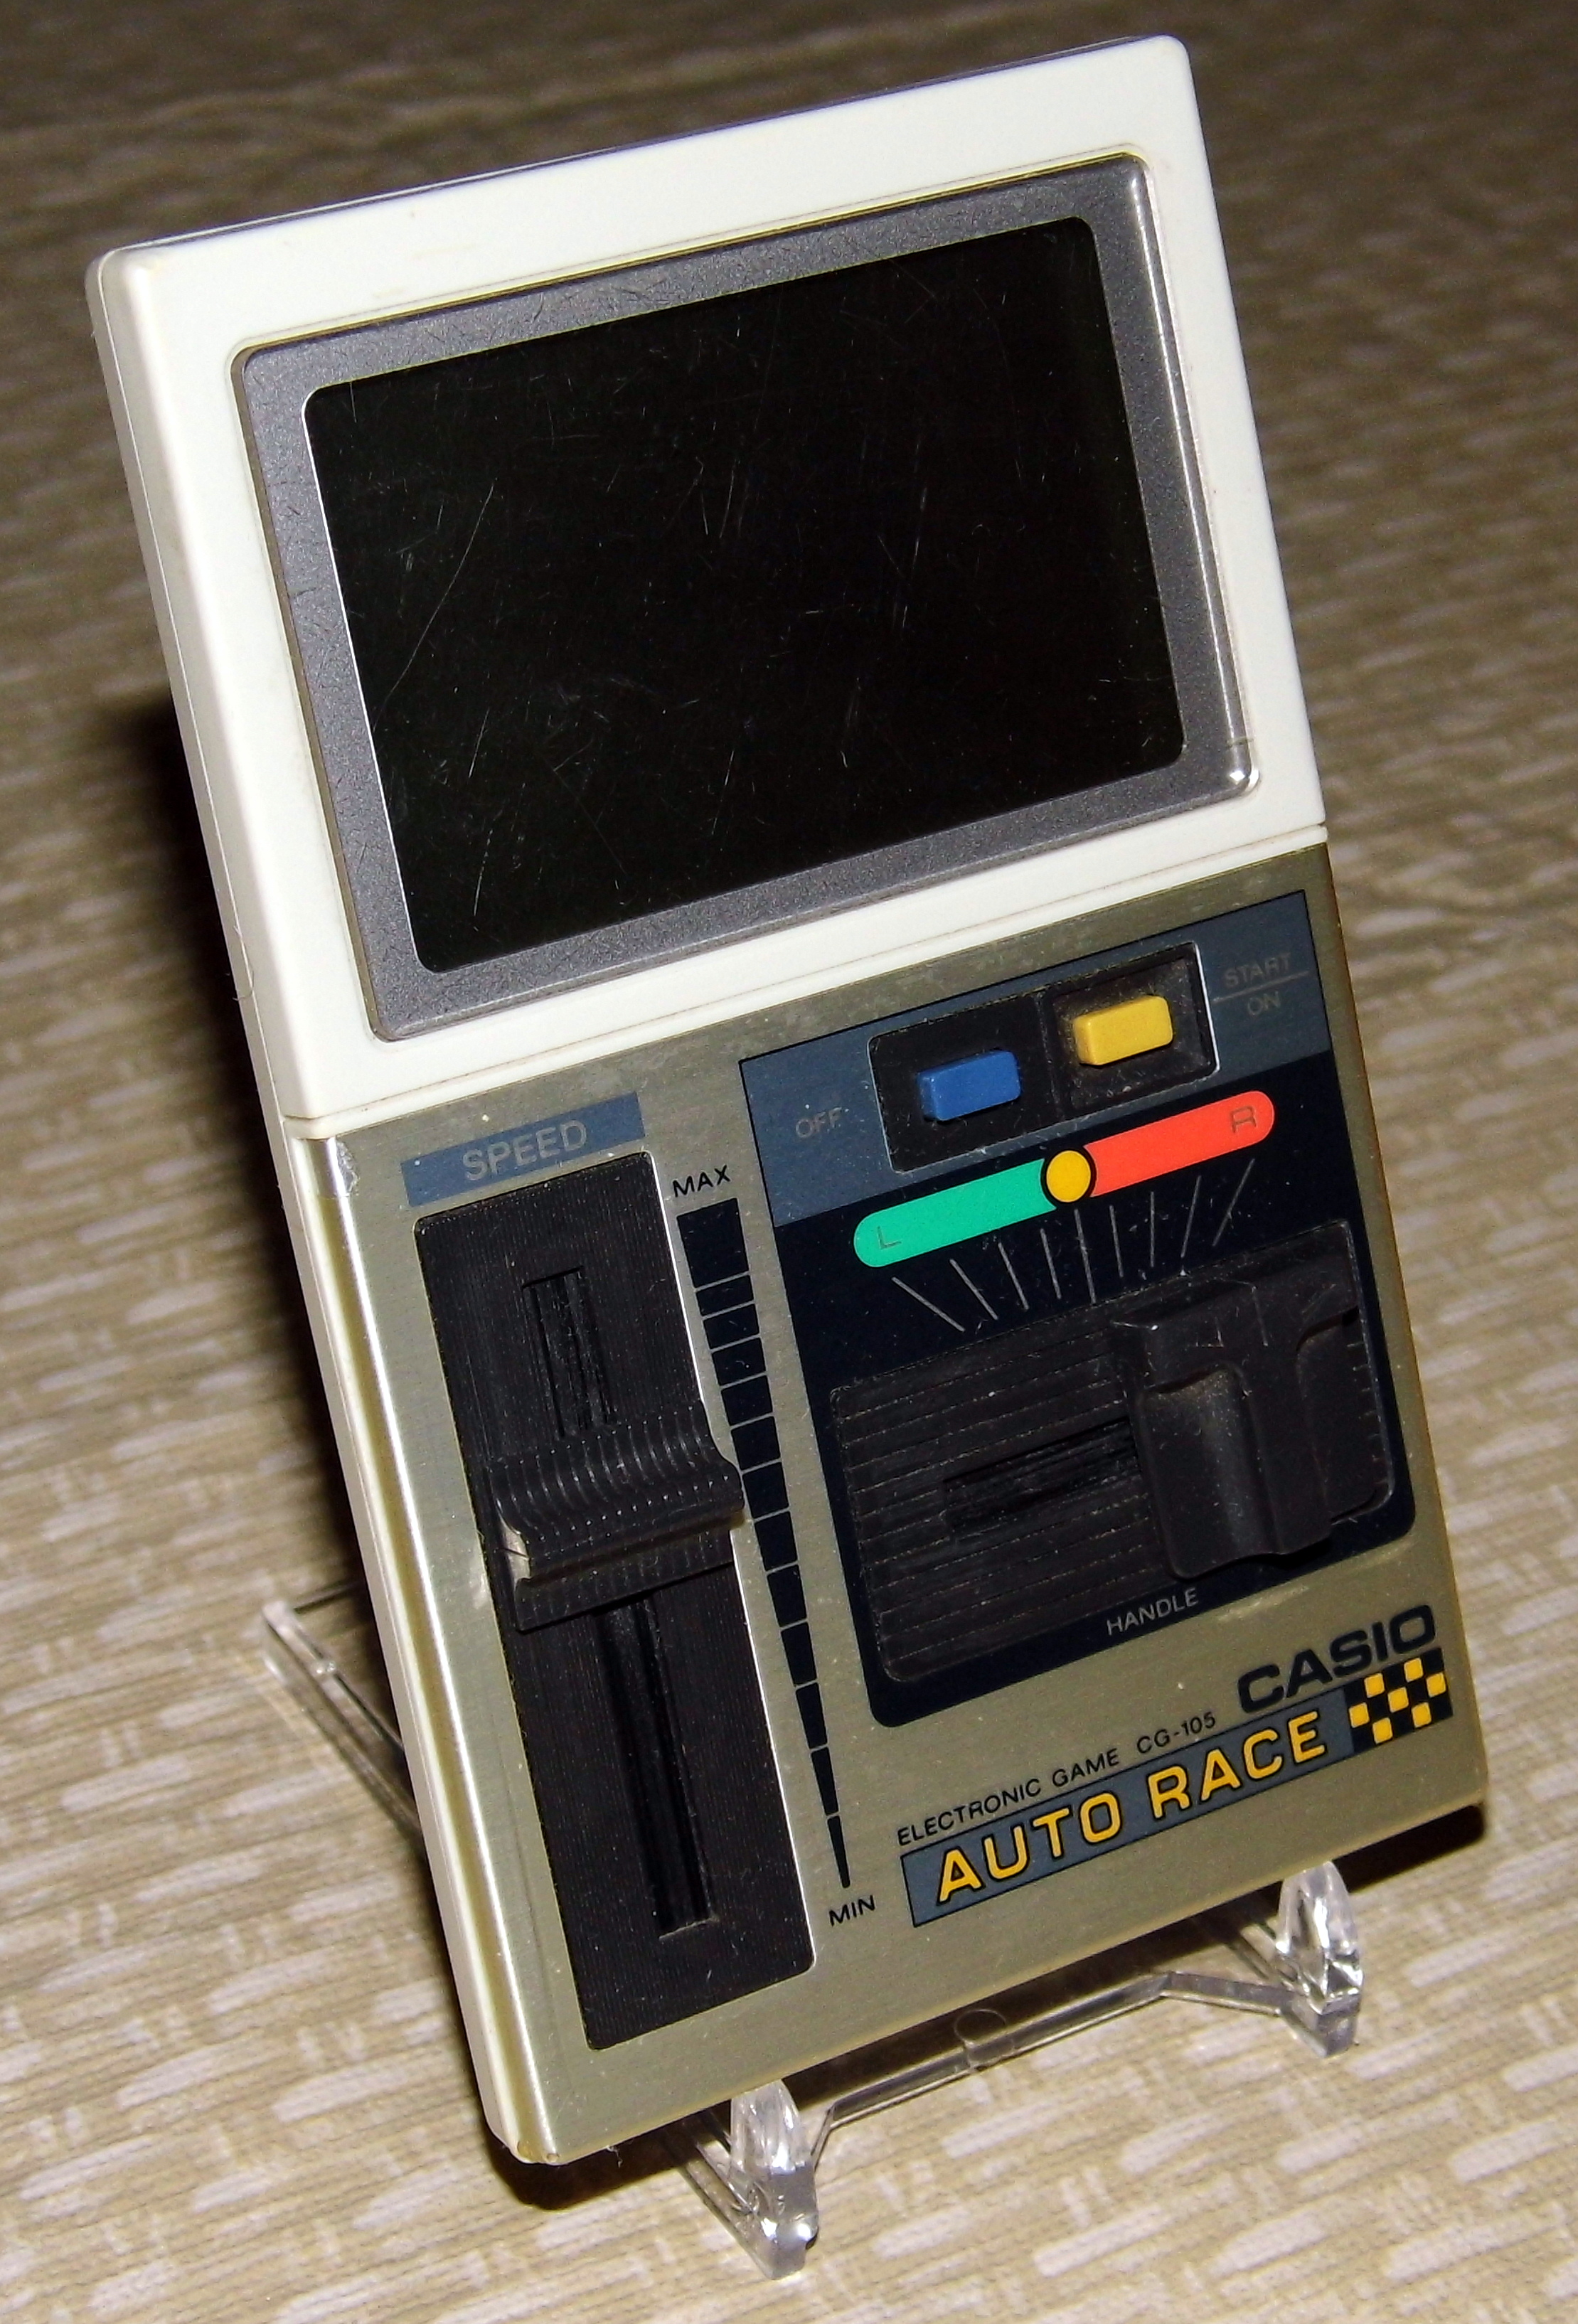 File:Casio Auto Race, Model CG-105, Made in Japan, Copyright 1982 ...